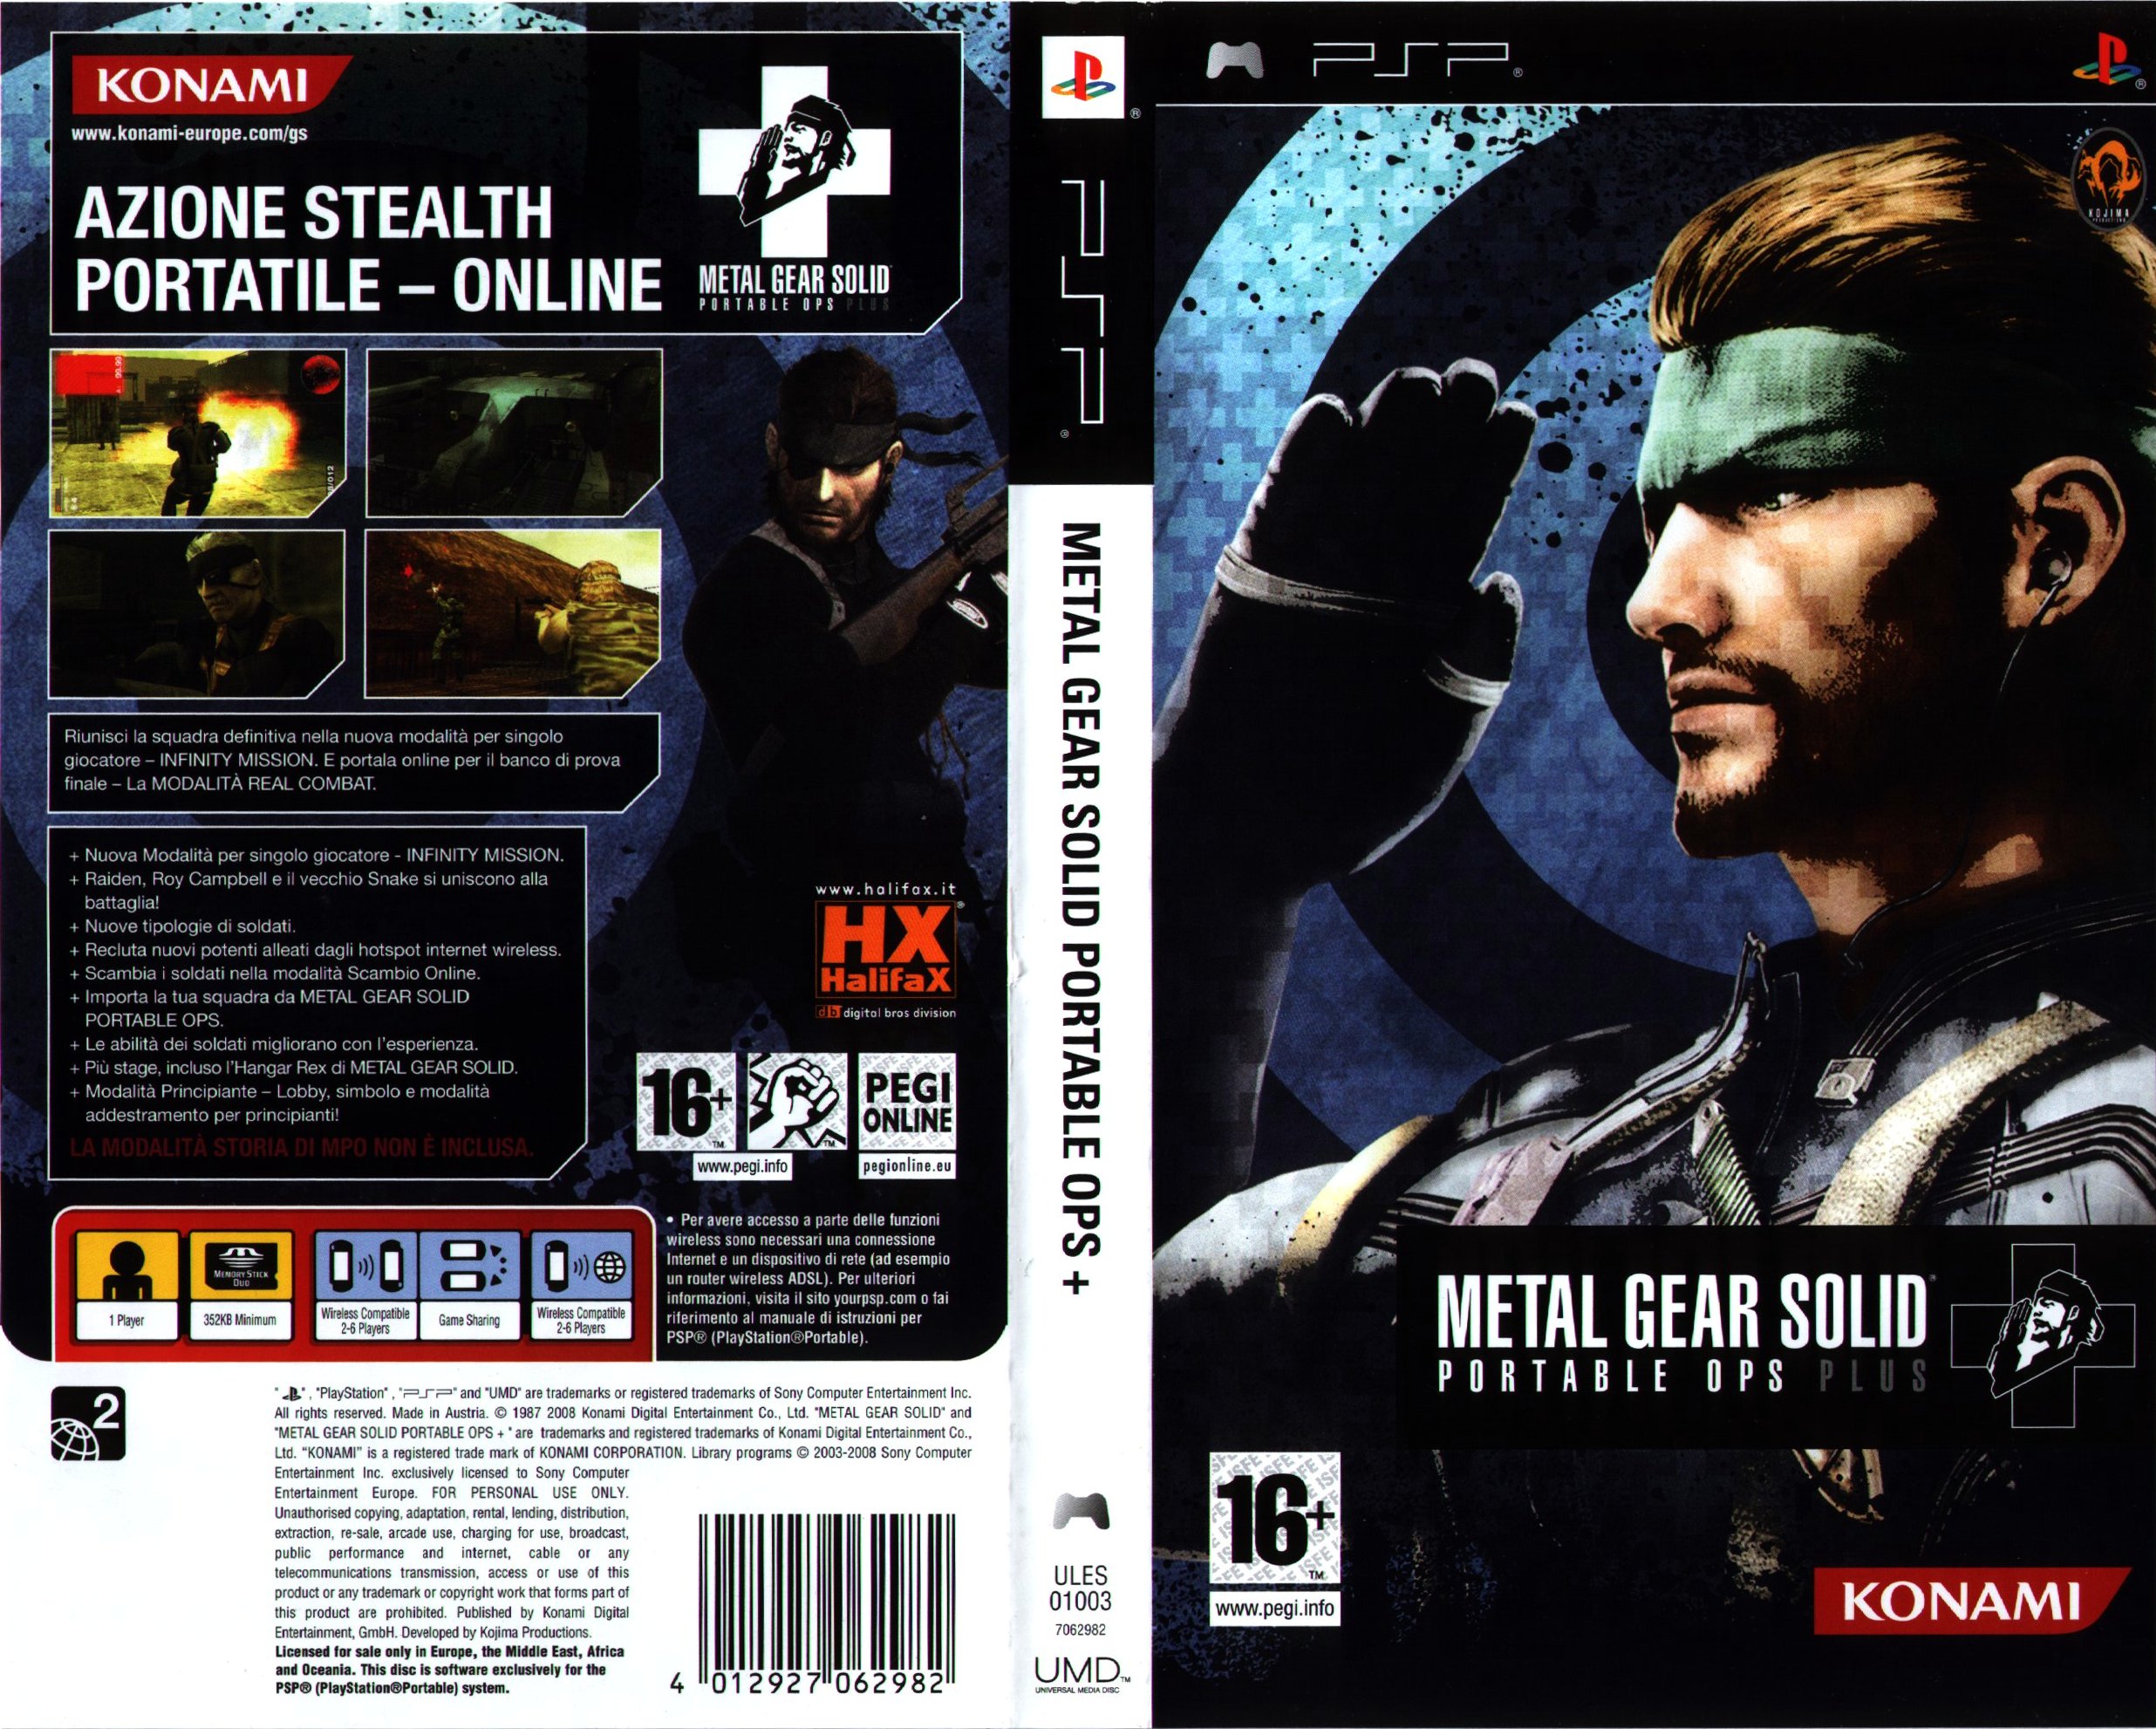 metal gear solid portable ops plus